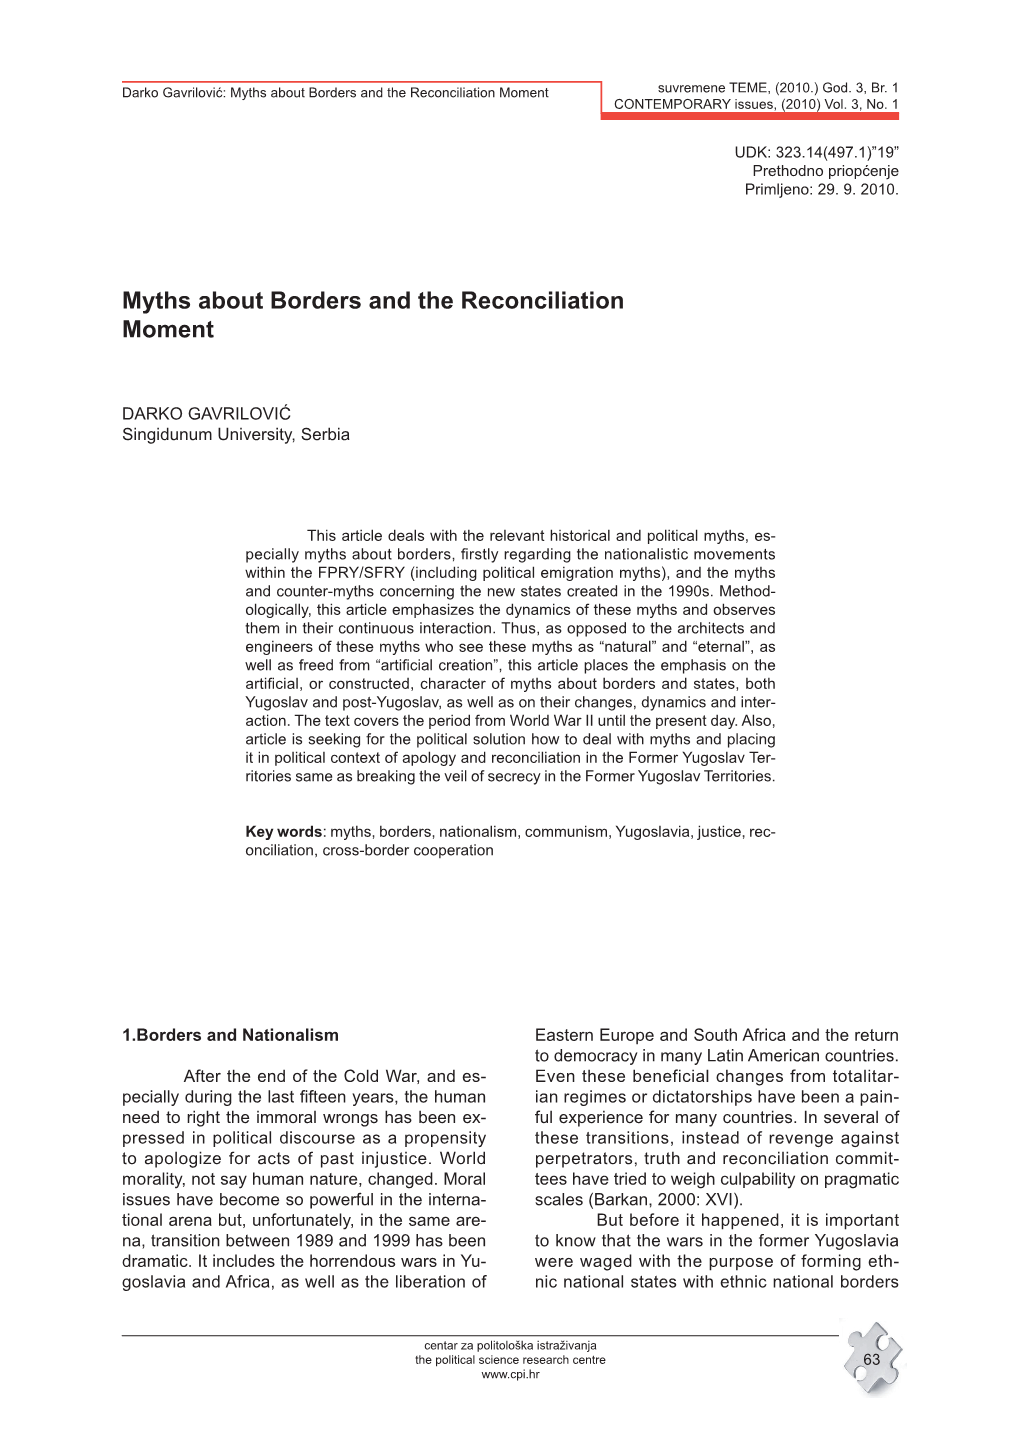 Myths About Borders and the Reconciliation Moment Suvremene TEME, (2010.) God